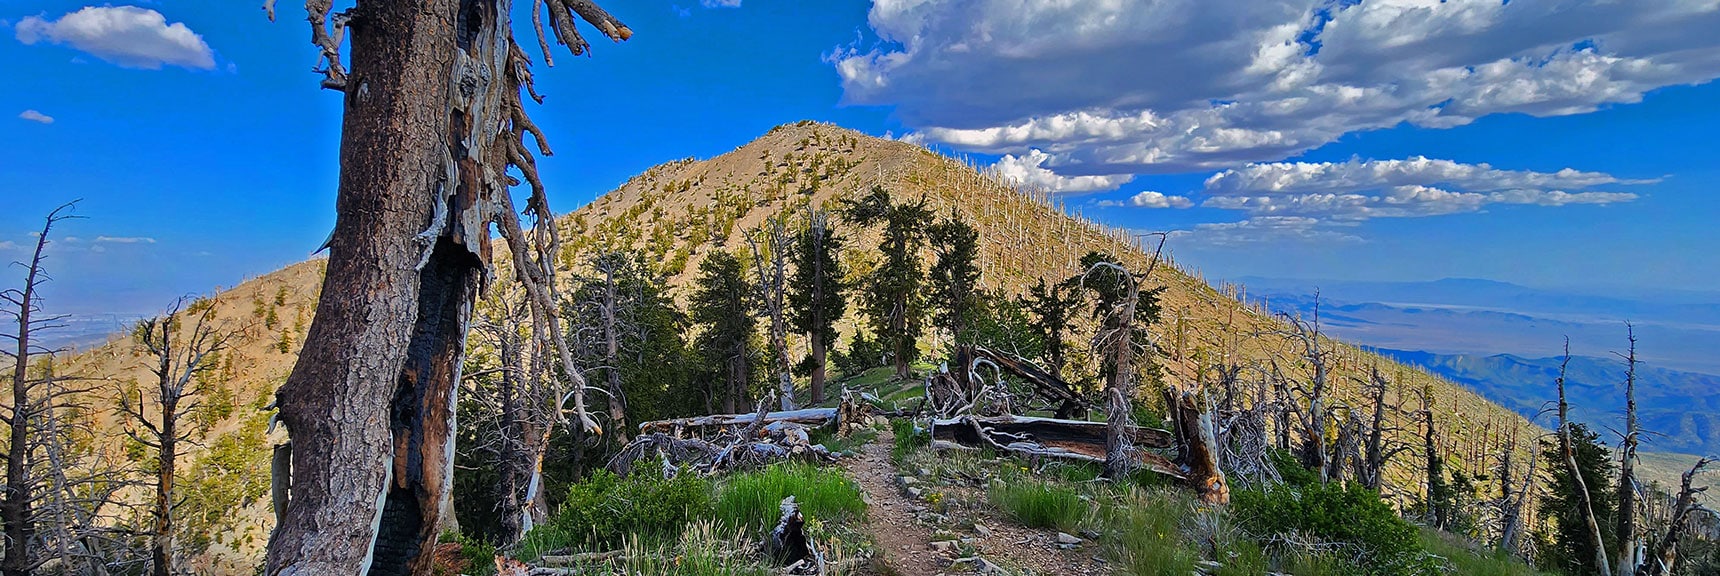 View Back Up to Griffith Peak from Junction Area Where Trail Splits Toward Charleston Peak. | Fletcher Canyon Trailhead to Harris Mountain Summit to Griffith Peak Summit Circuit Adventure | Mt. Charleston Wilderness, Nevada